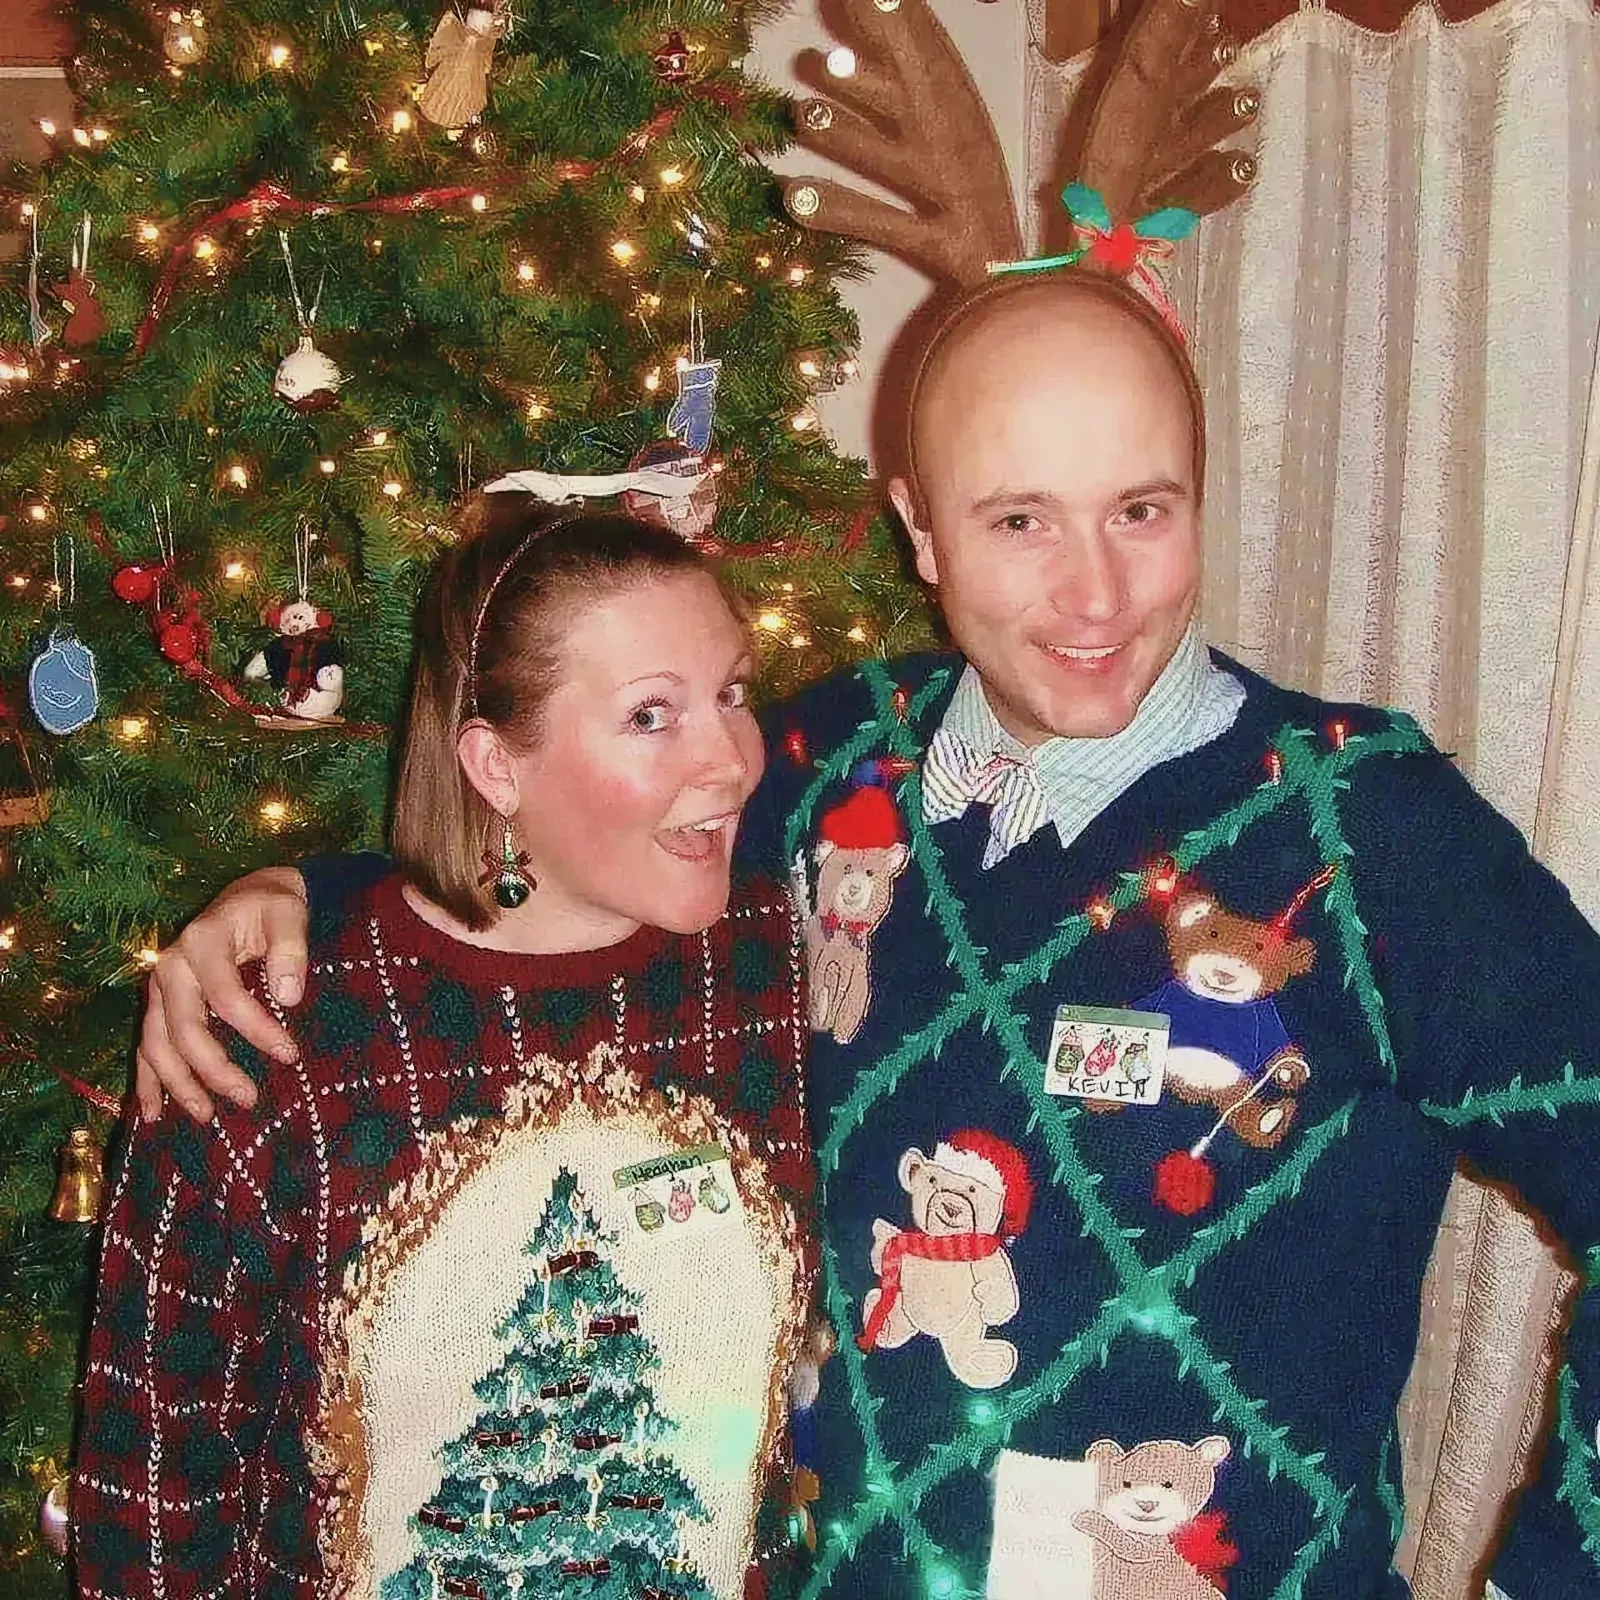 Jovial man and woman in front of a festively decorated Christmas tree